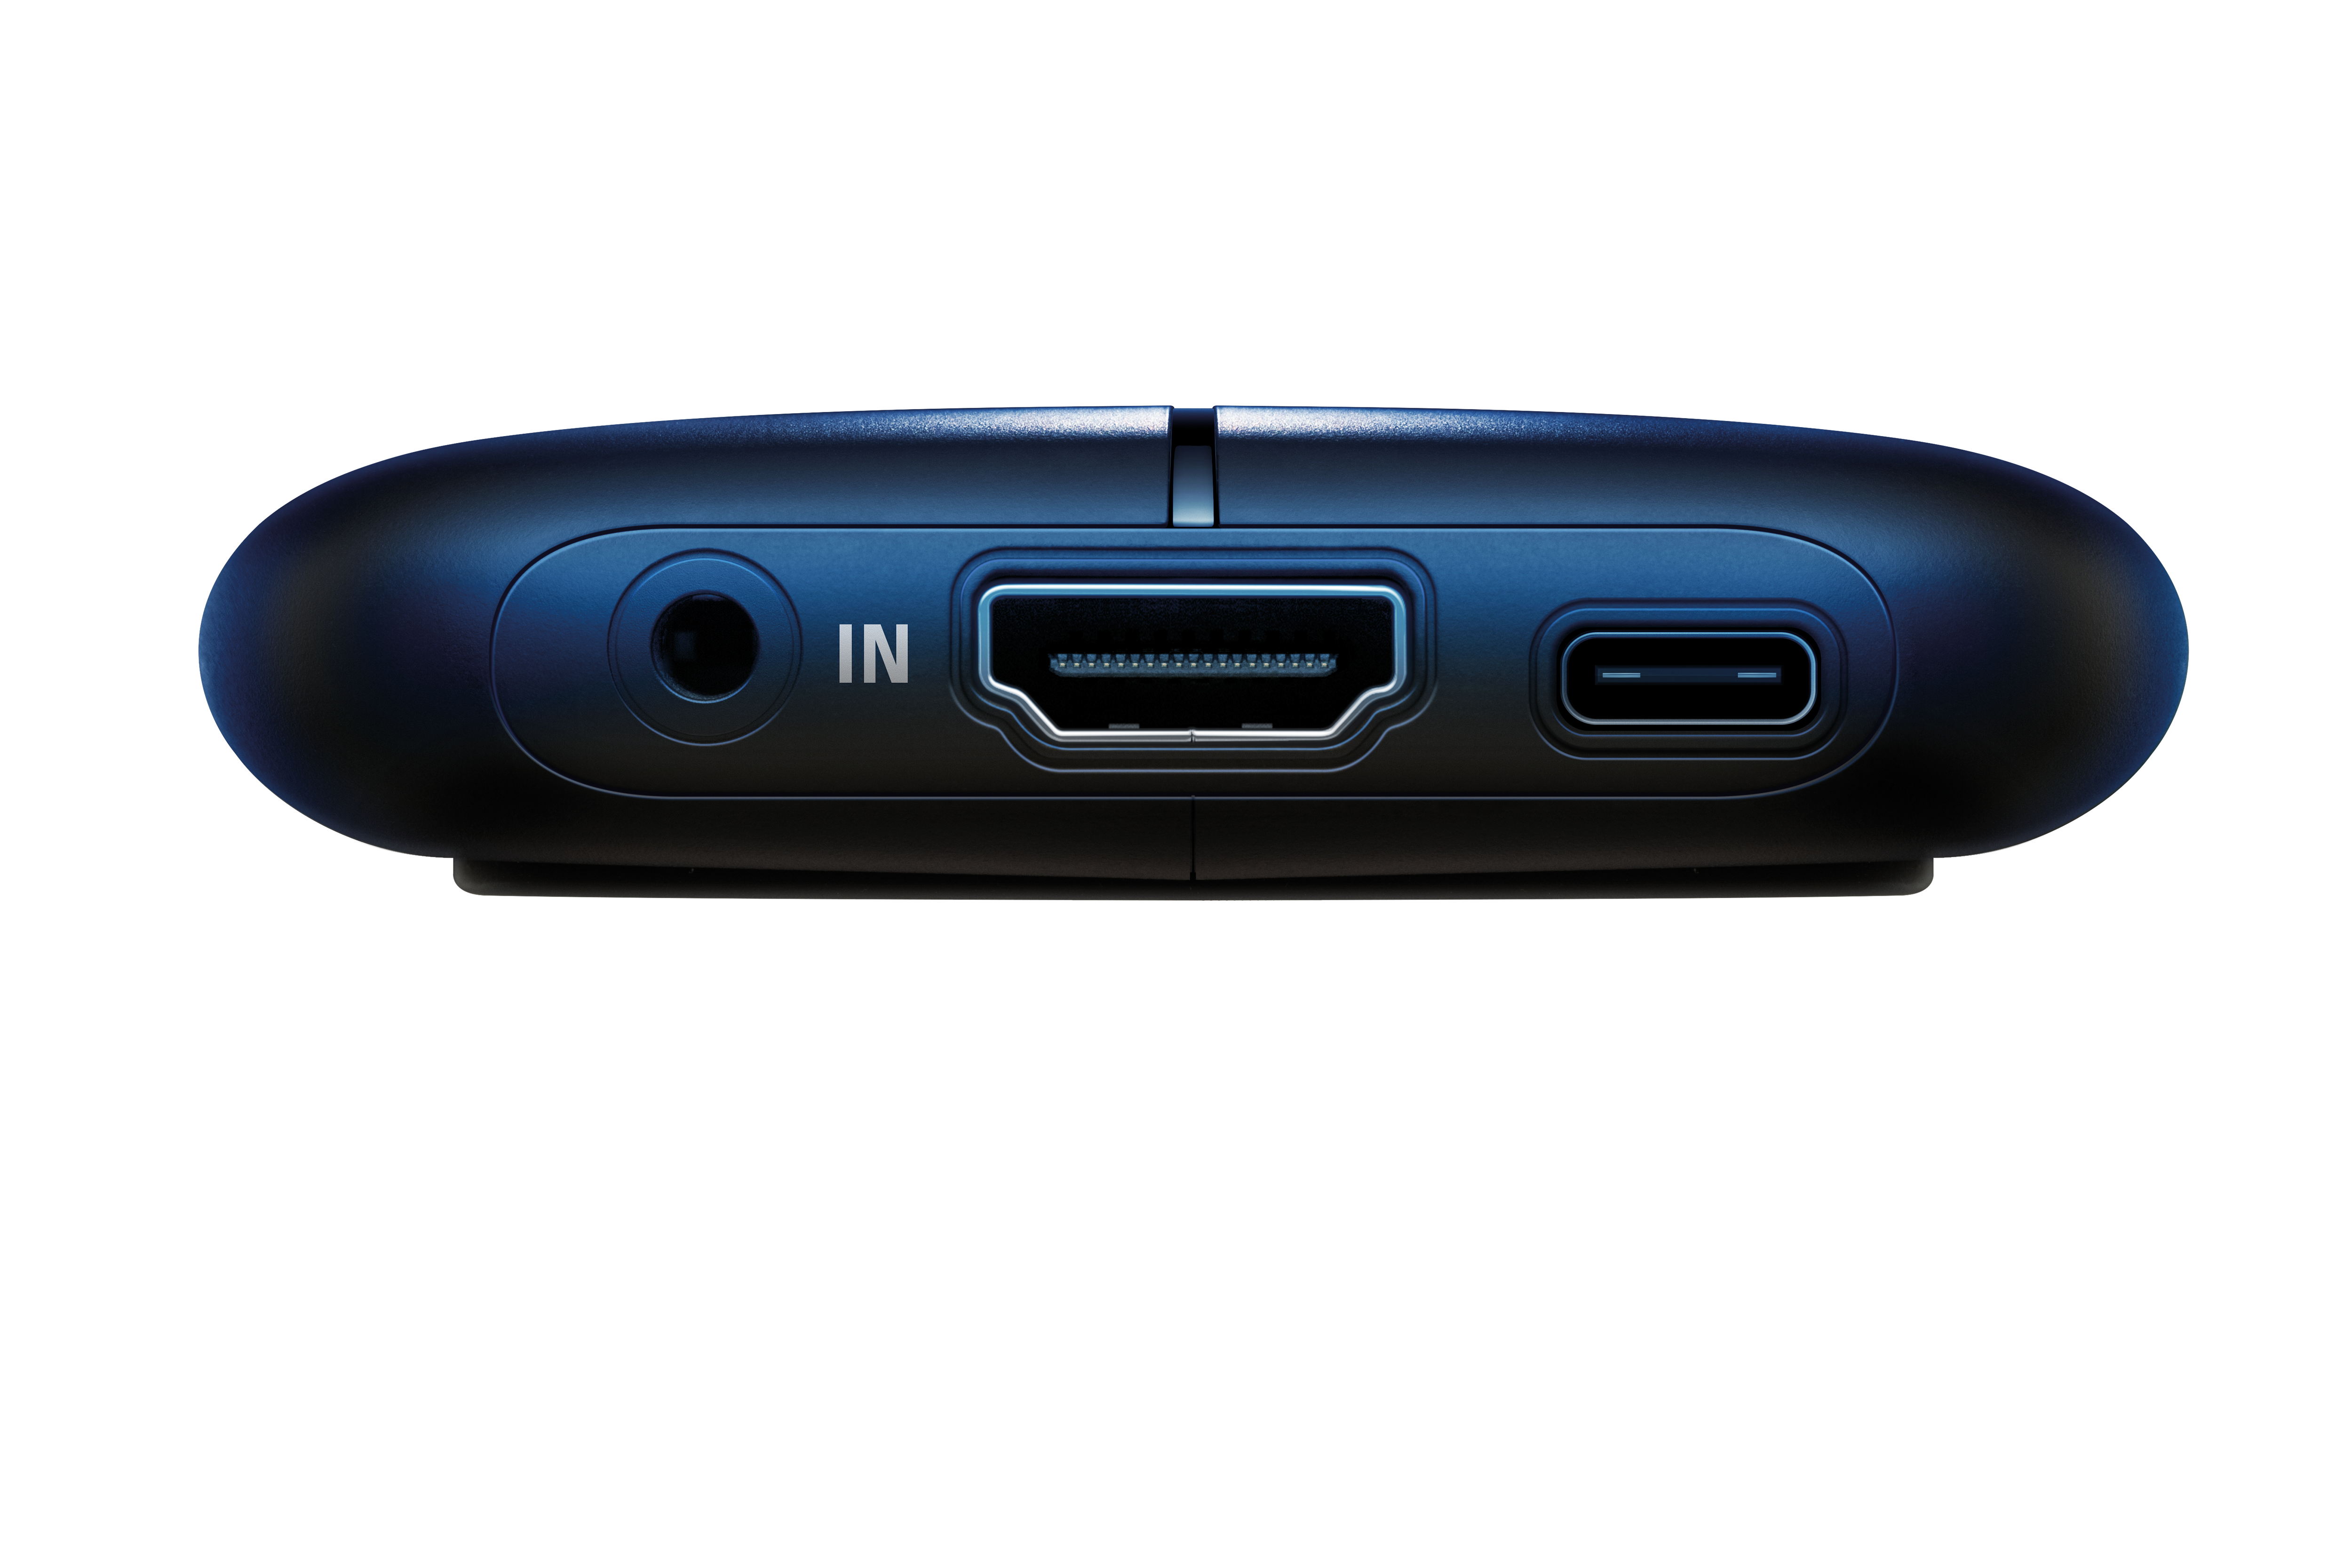 Compare Elgato Game Capture HD60 S to other Elgato Gaming products – Elgato